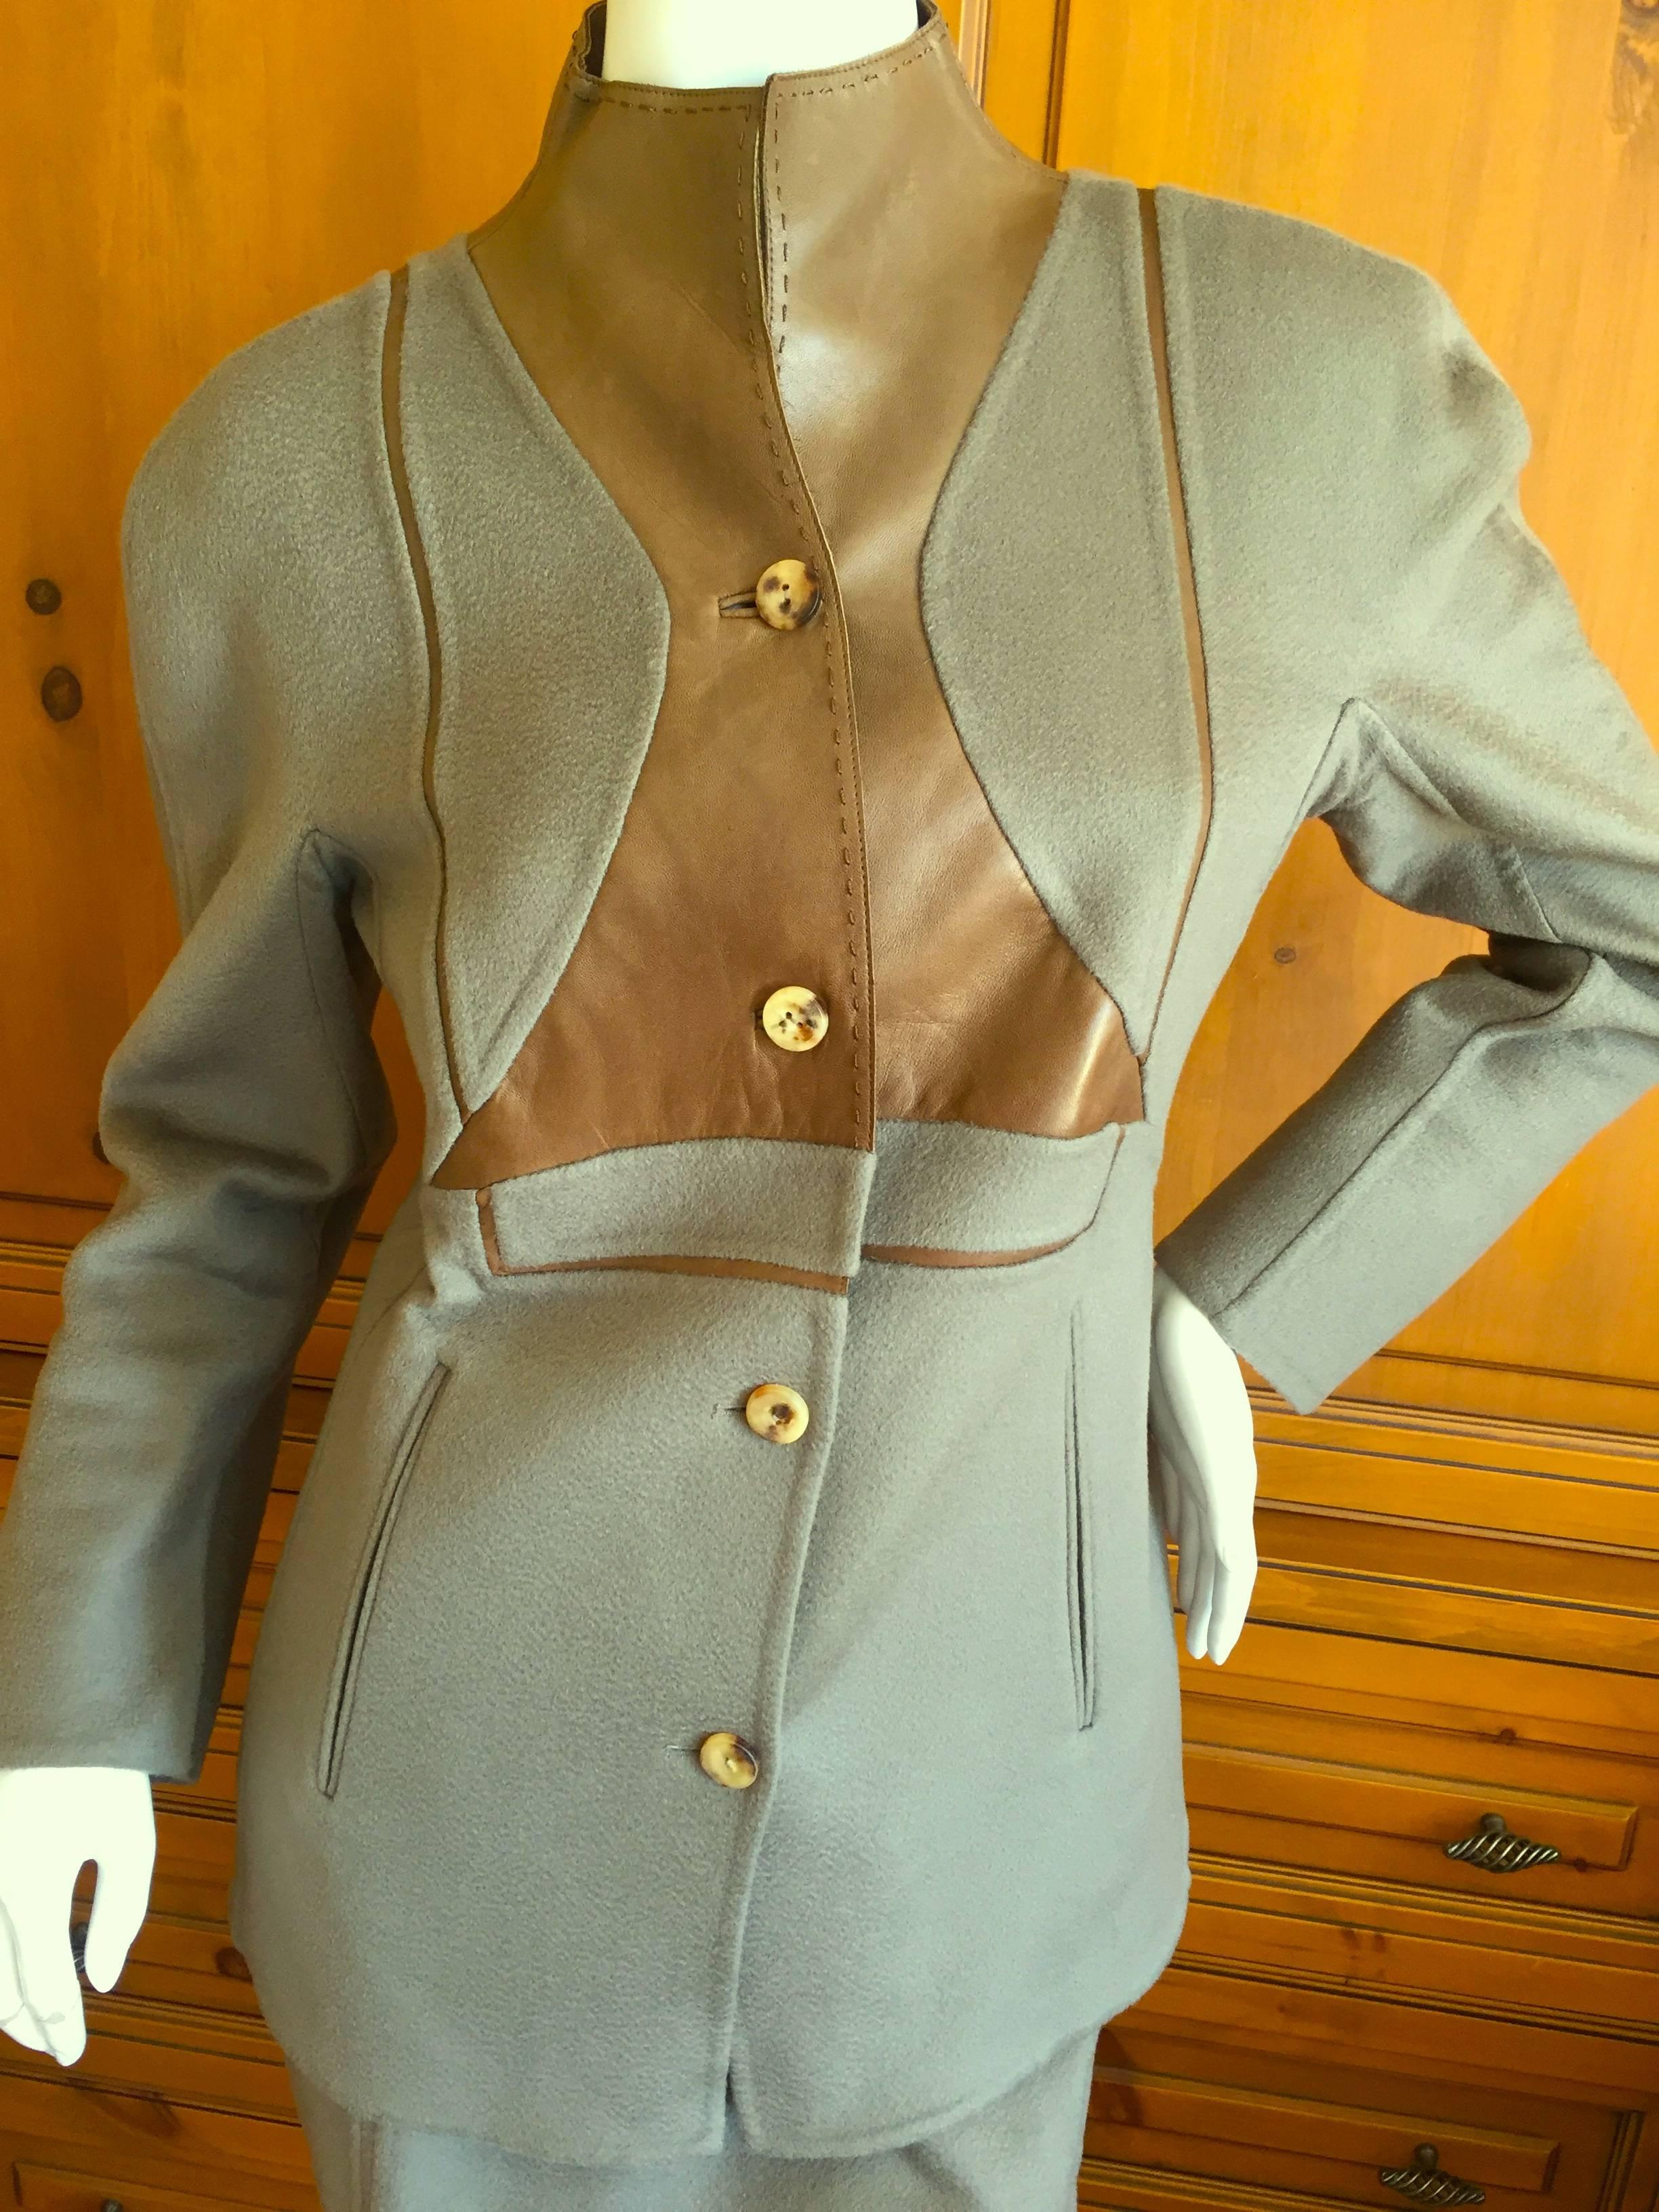 Luxurious pure double face cashmere and leather suit from Ralph Rucci.
Detailed to perfection as only Ralph can, pure luxe.
Size 6
Jacket 
Bust 38